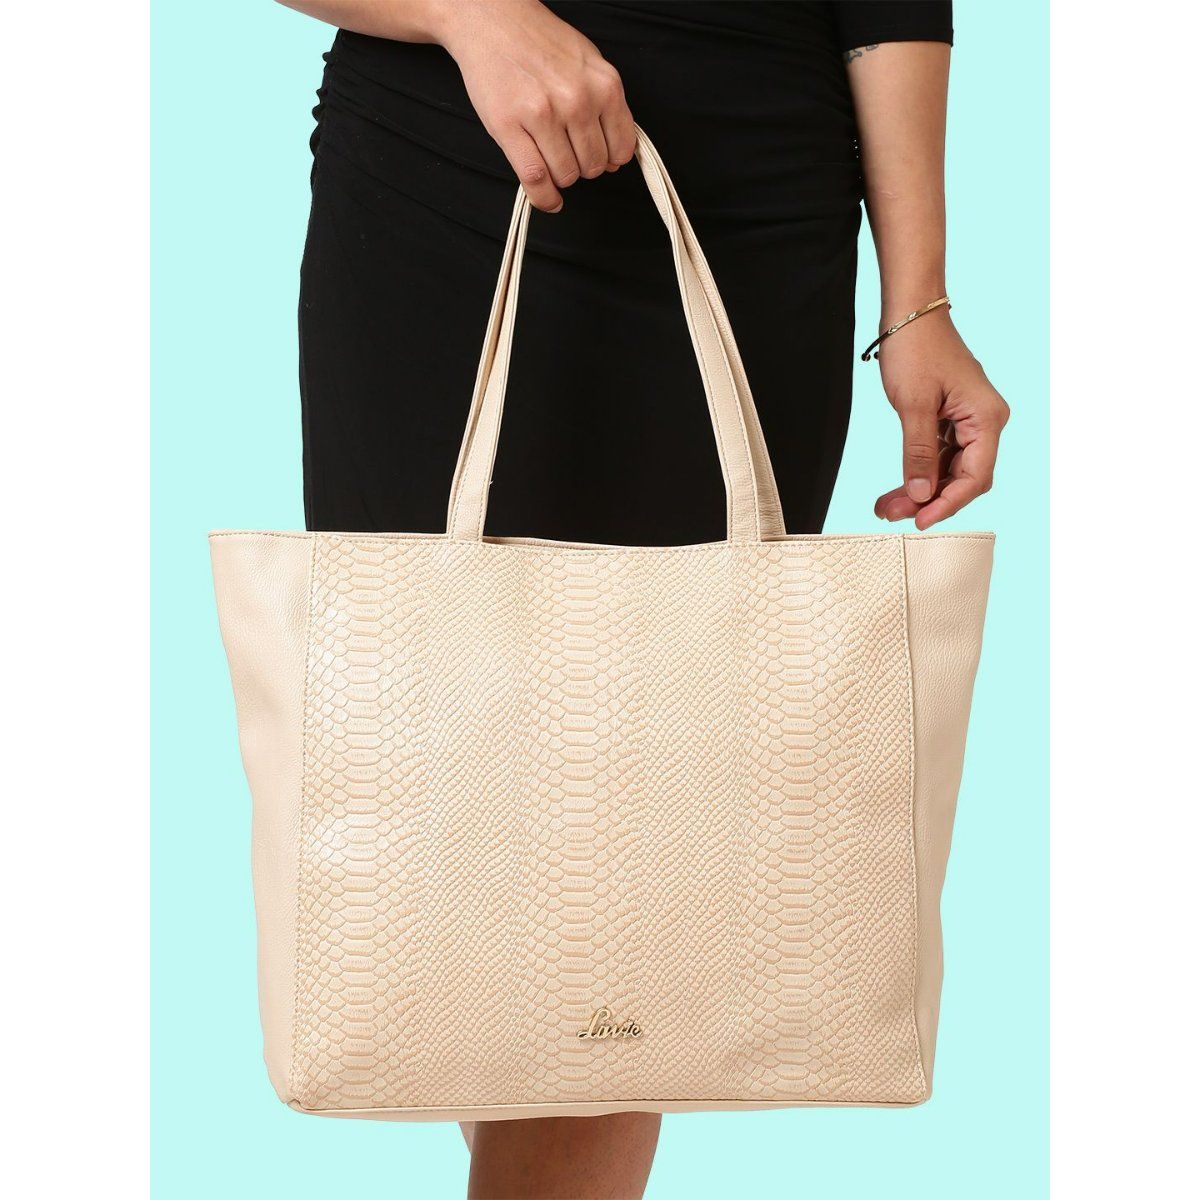 Buy Trendy Lavie Bags For Women Online At Amazing Prices  Tata CLiQ